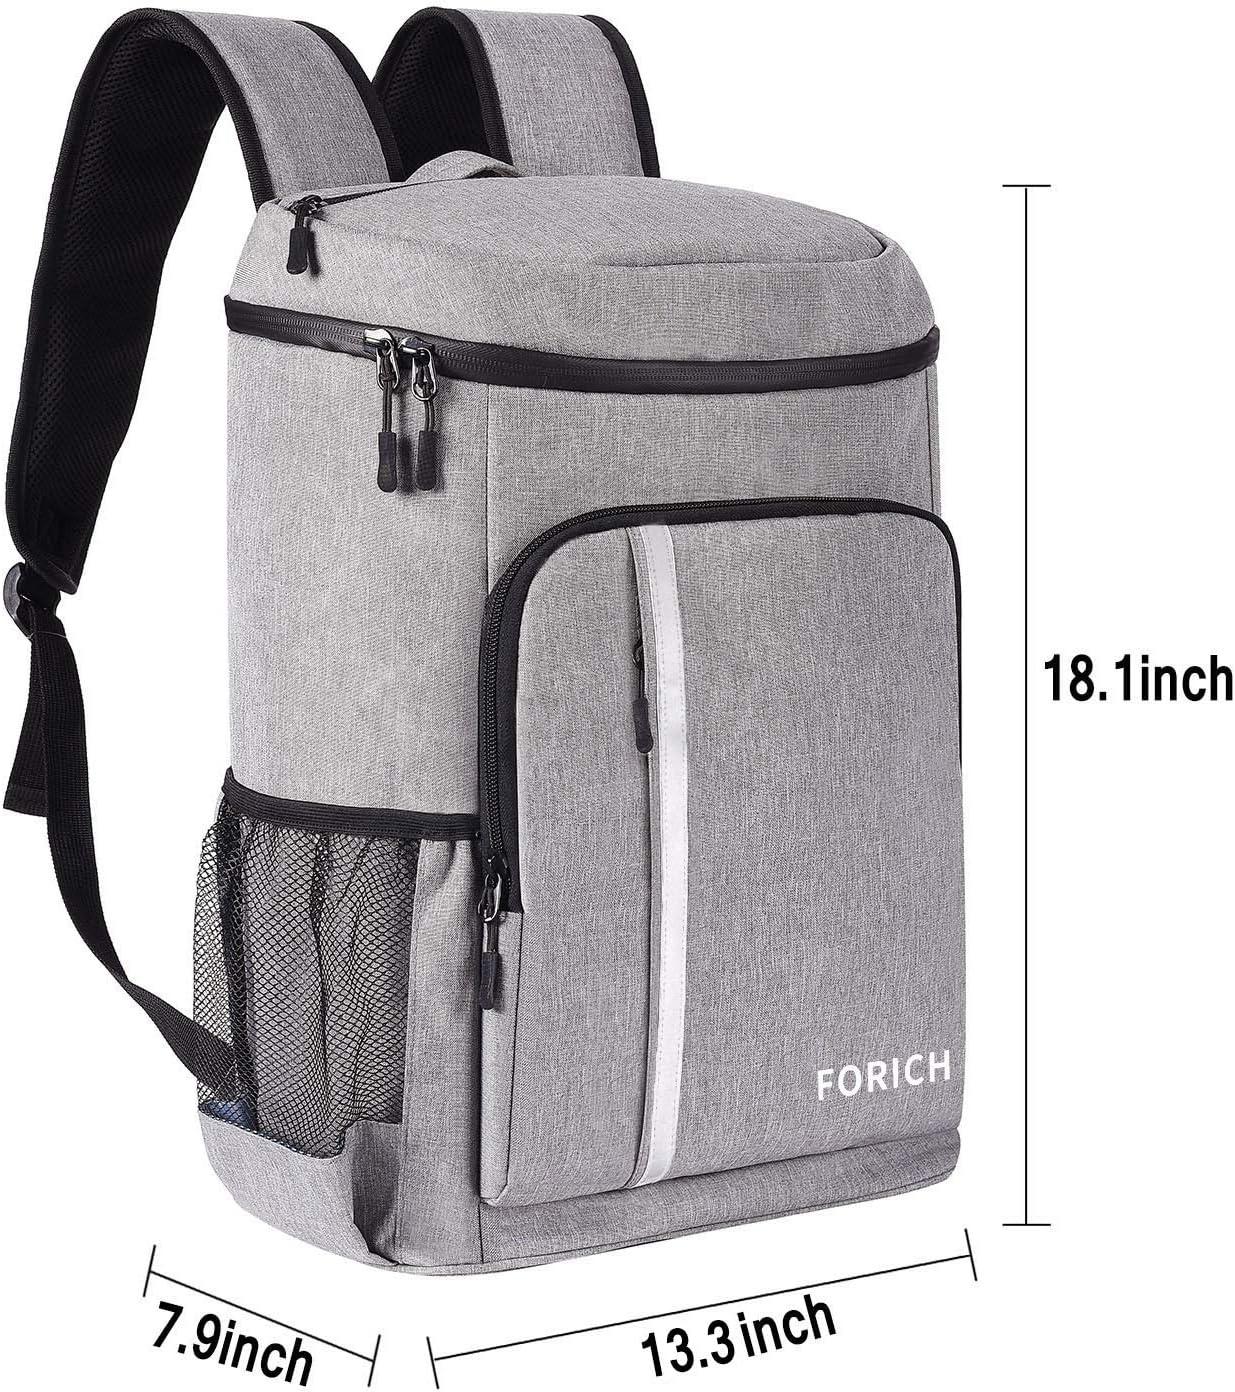 FORICH Backpack Cooler Leakproof Insulated Waterproof Backpack